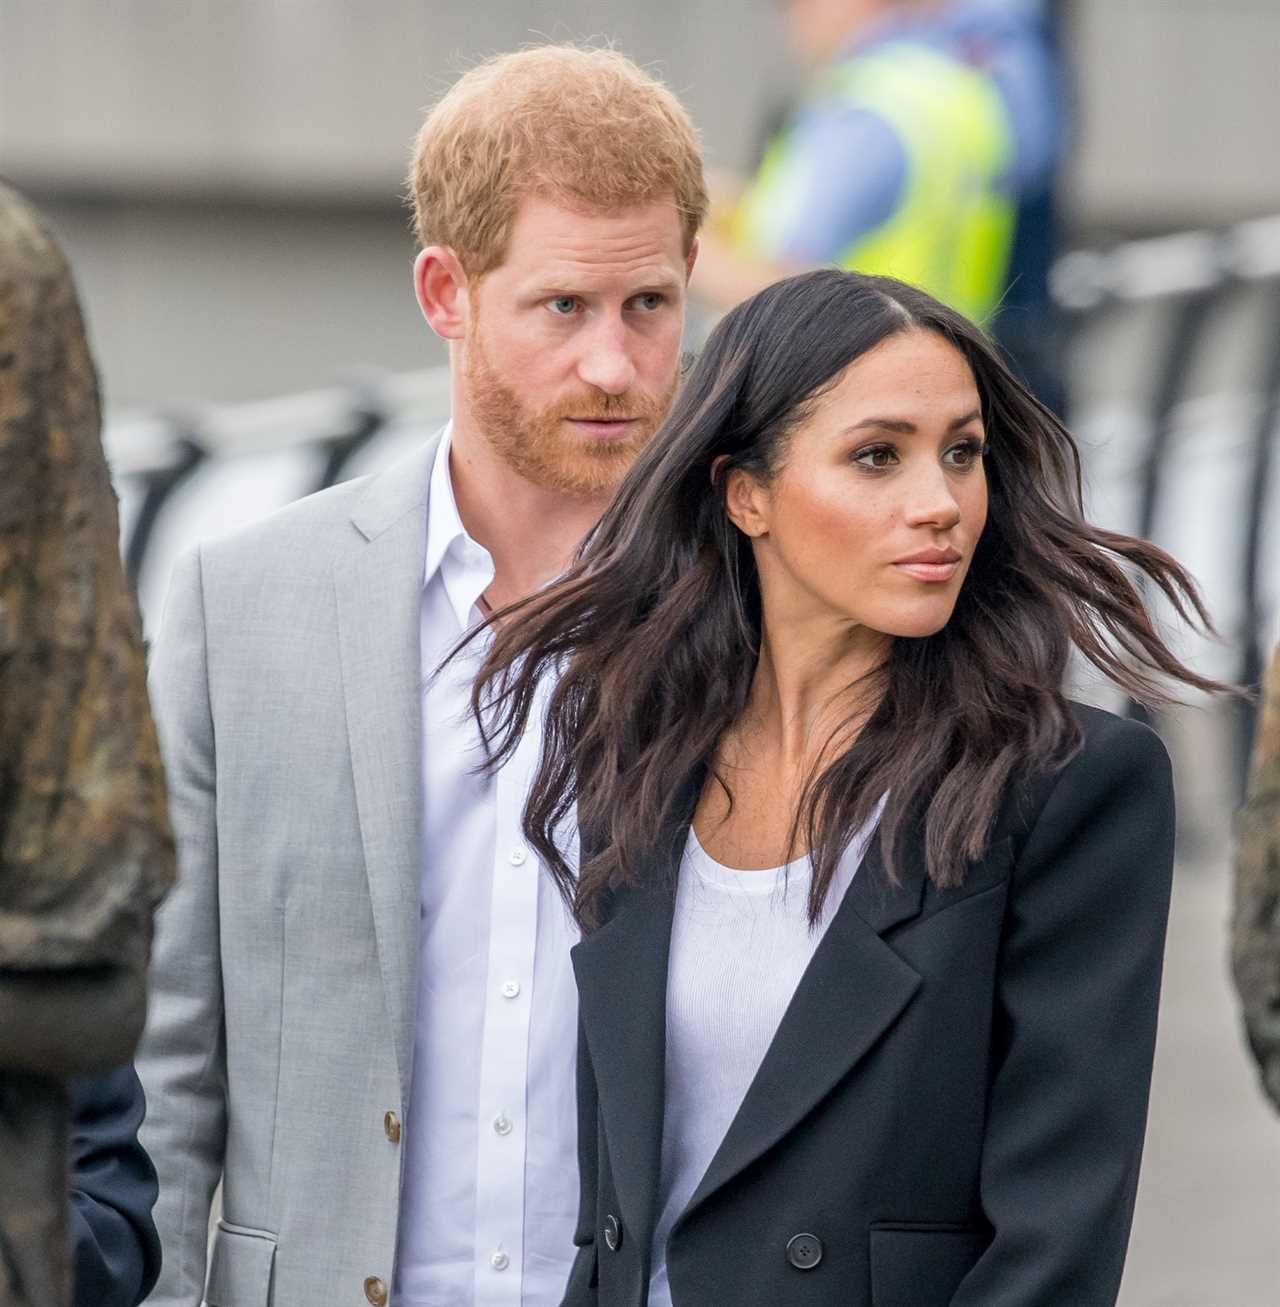 Prince Harry and Meghan ‘will not spend Christmas’ with royals as relations ‘near rock bottom’ over bombshell memoir